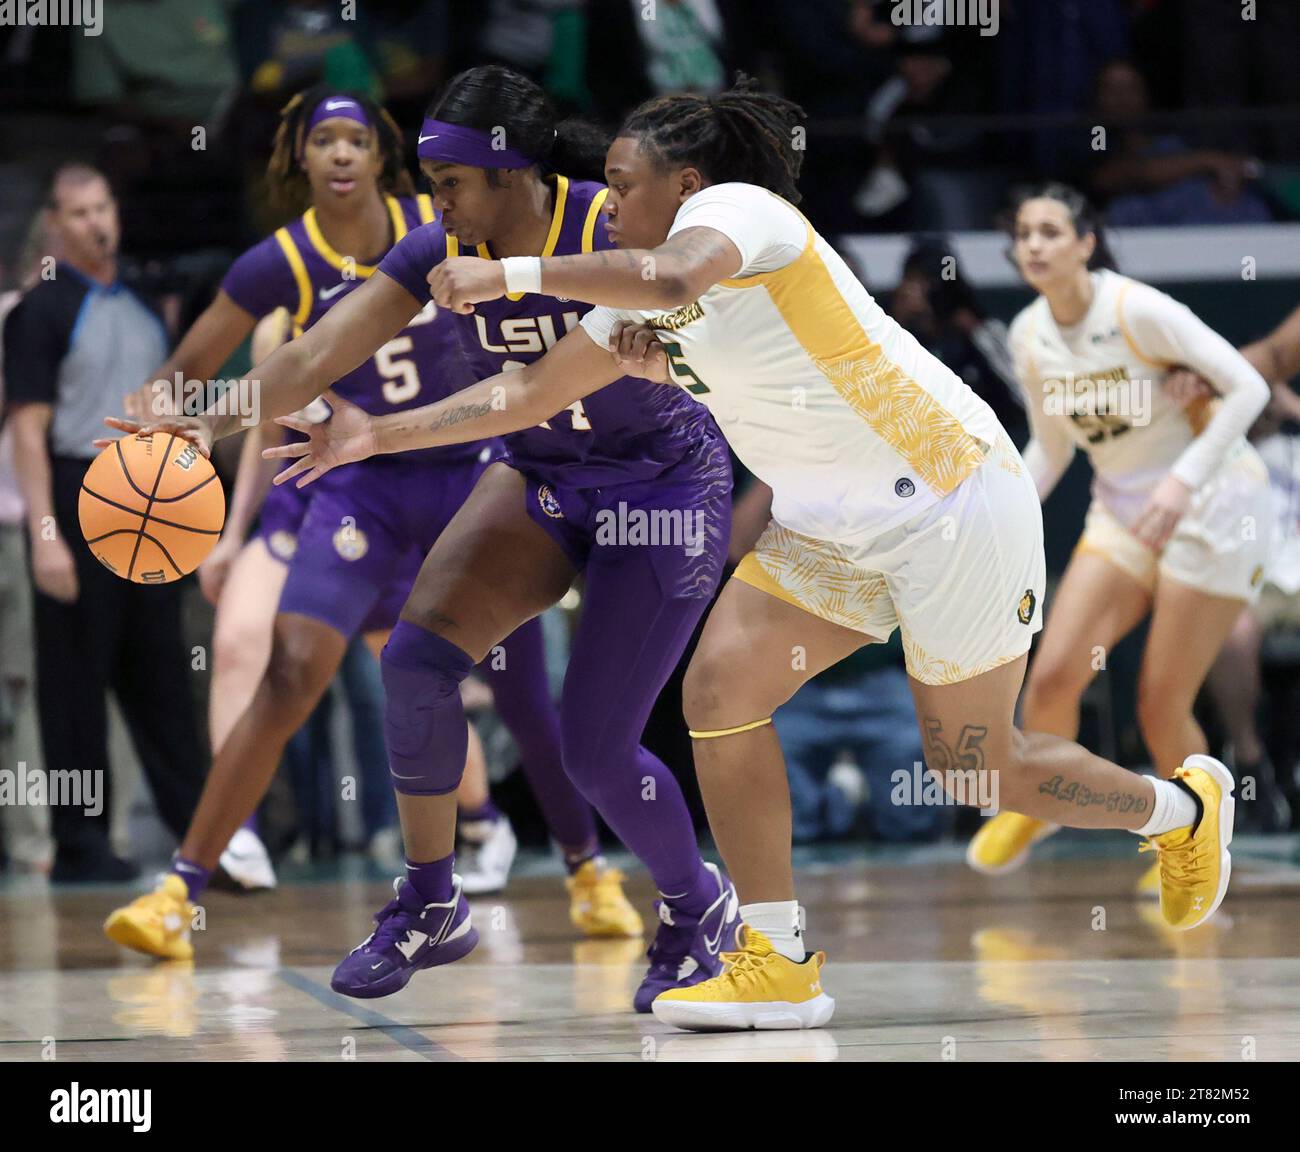 Hammond, USA. 17th Nov, 2023. LSU Lady Tigers guard Aneesah Morrow (24) and SE Louisiana Lady Lions guard Taylor Bell (5) both go after a loose ball during a women's college basketball game at the University Center in Hammond, Louisiana on Friday, November 17, 2023. (Photo by Peter G. Forest/Sipa USA) Credit: Sipa USA/Alamy Live News Stock Photo